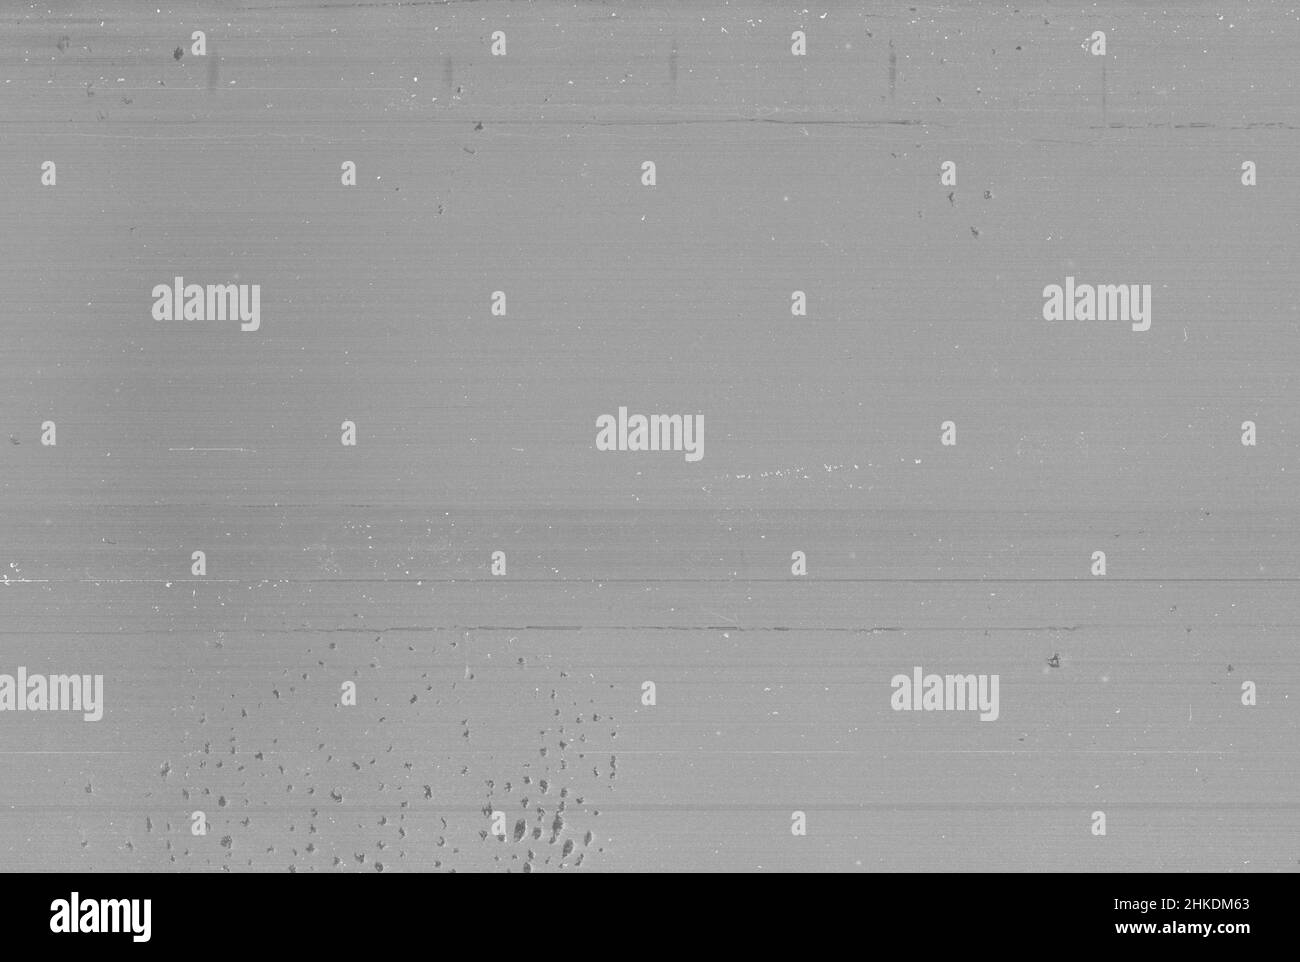 50 Iso solution damaged Black and white film grain texture background Stock Photo